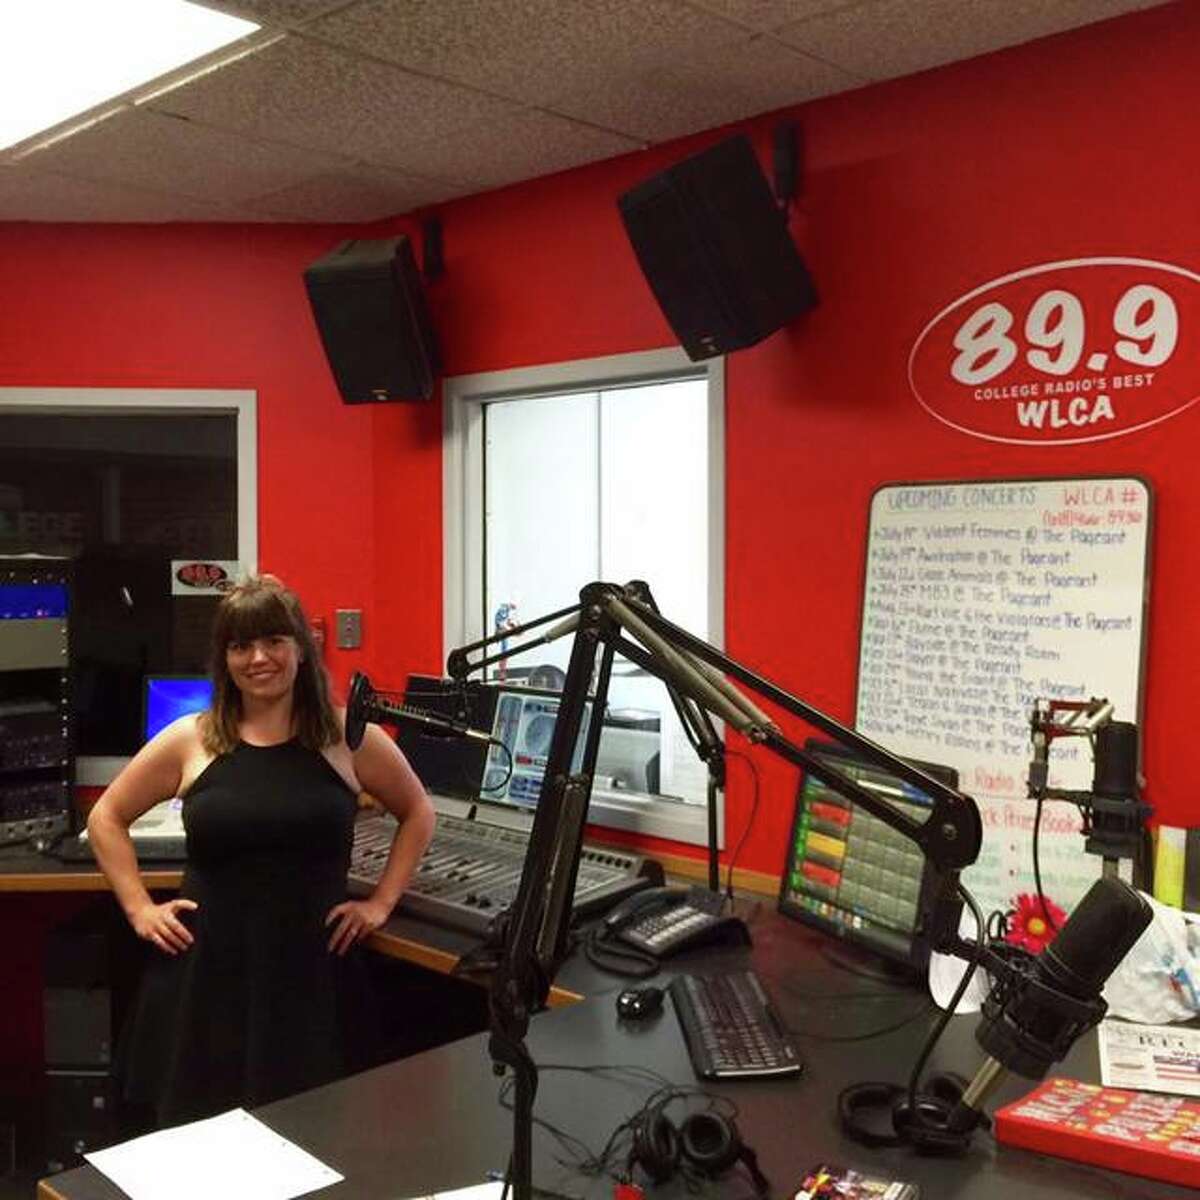 Amanda Valentine visits the WLCA Studio during a reunion held on L&C’s Godfrey Campus in July 2016.